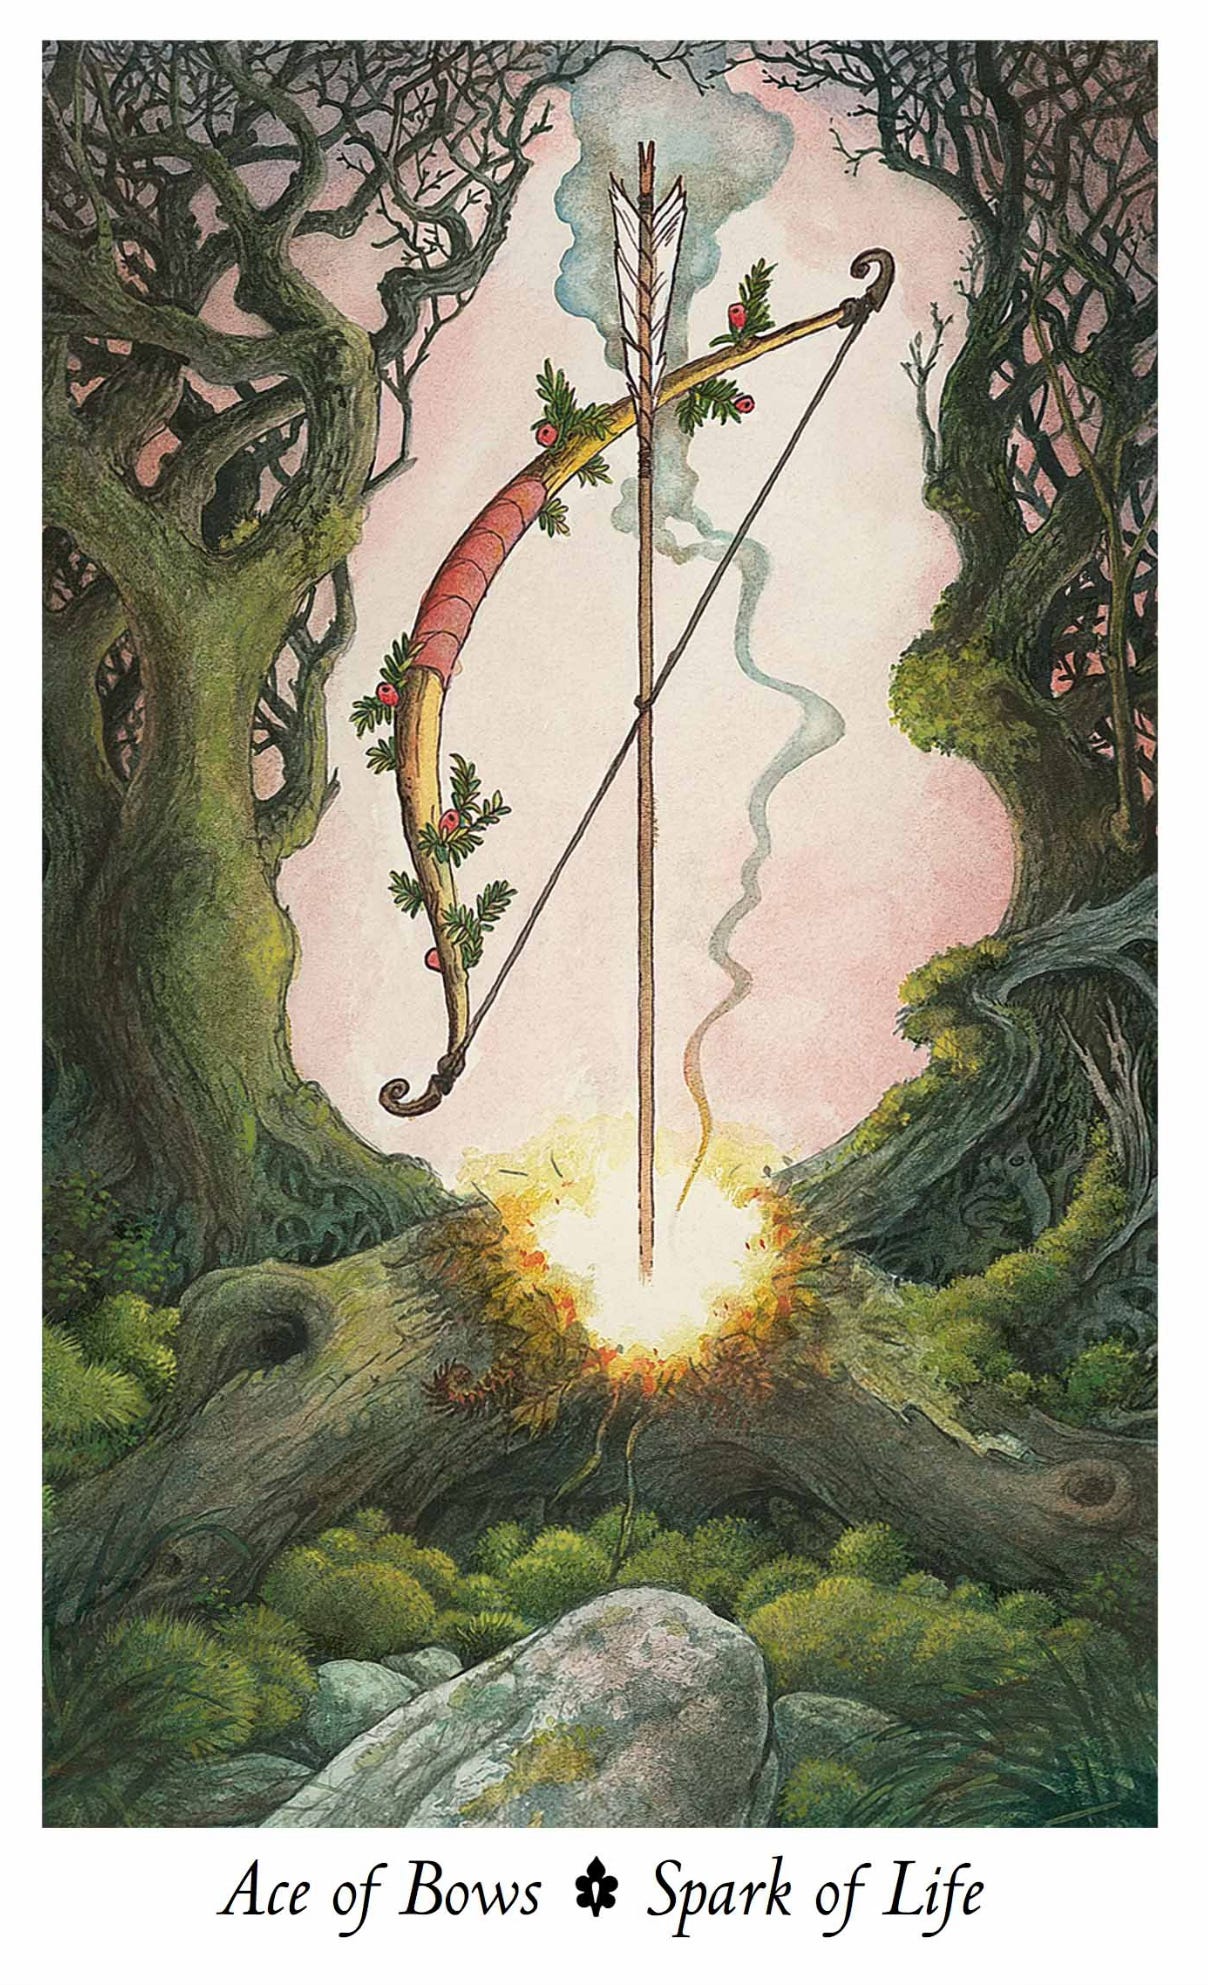 Tarot Card Ace of Bows from the Wildwood Tarot: Against a shimmering background of leaves and branches, a stout, rough-hewn hunting bow shimmers with the fire of life itself. The tip of an arrow rests on a heap of kindling chait, and curled bark is bursting into flame as the tip flashes with brilliant incandescent light.